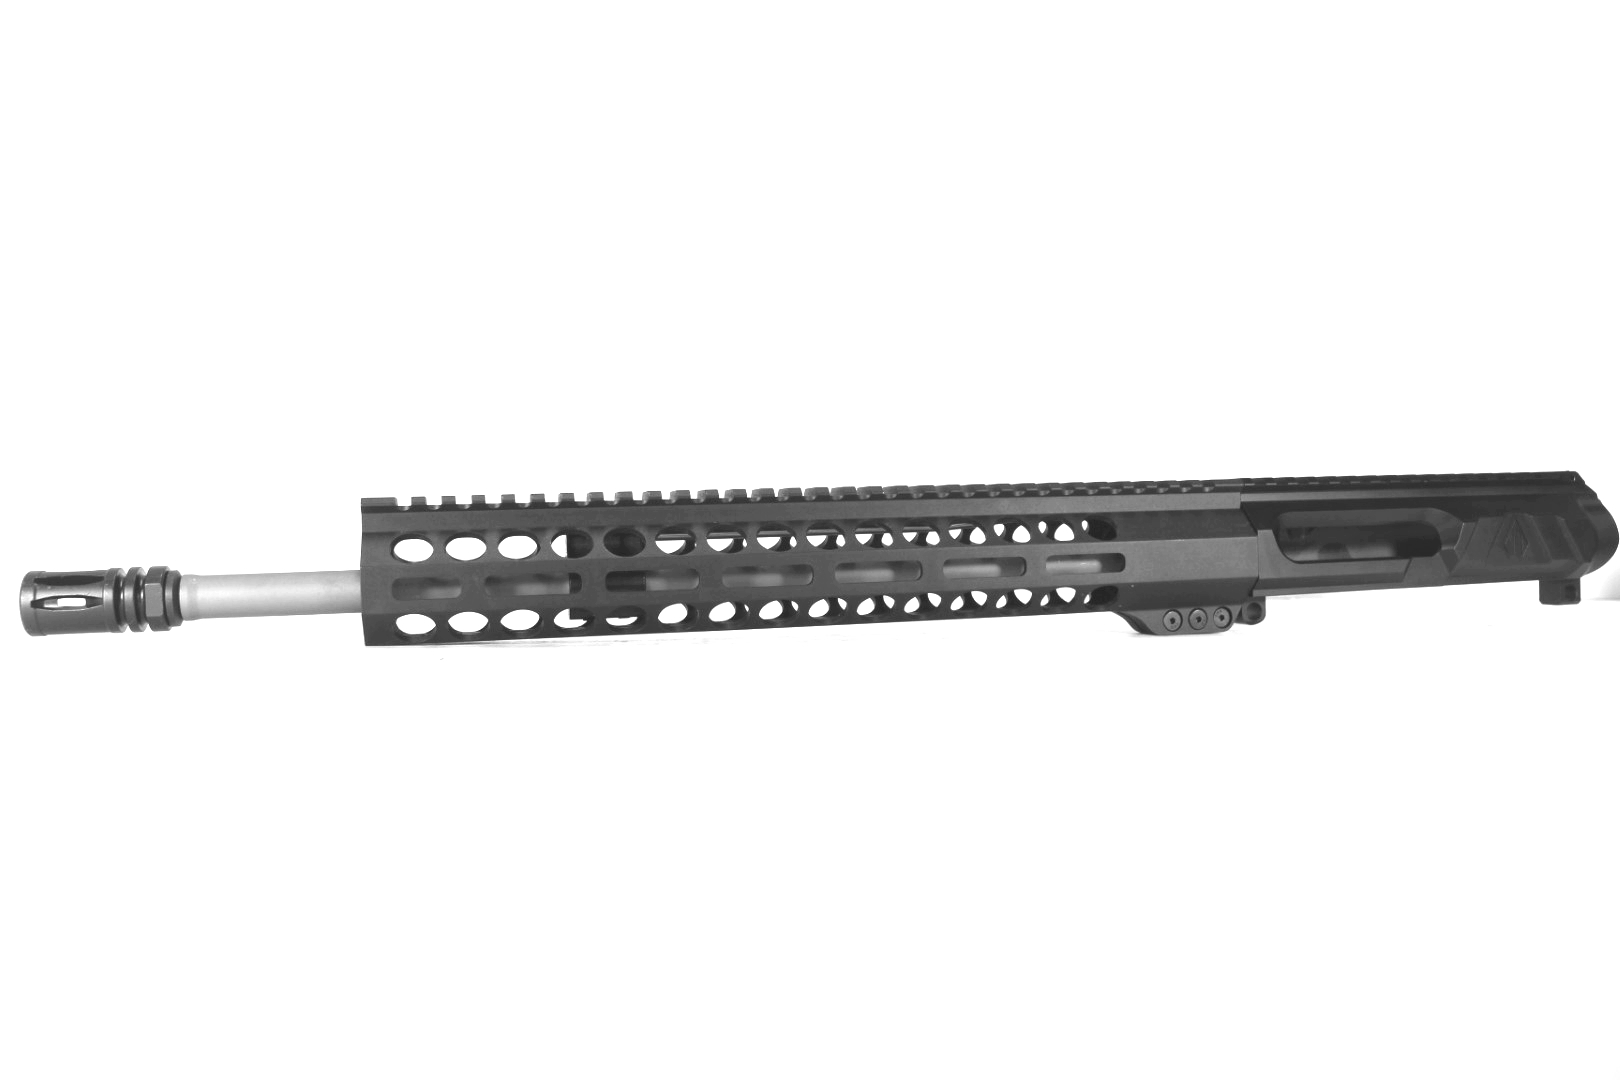 16 inch AR-15 LEFT HANDED AR-15 Non Reciprocating Side Charging 223 Wylde Stainless Premium Upper Featuring a Ballistic Advantage Hanson Series Barrel